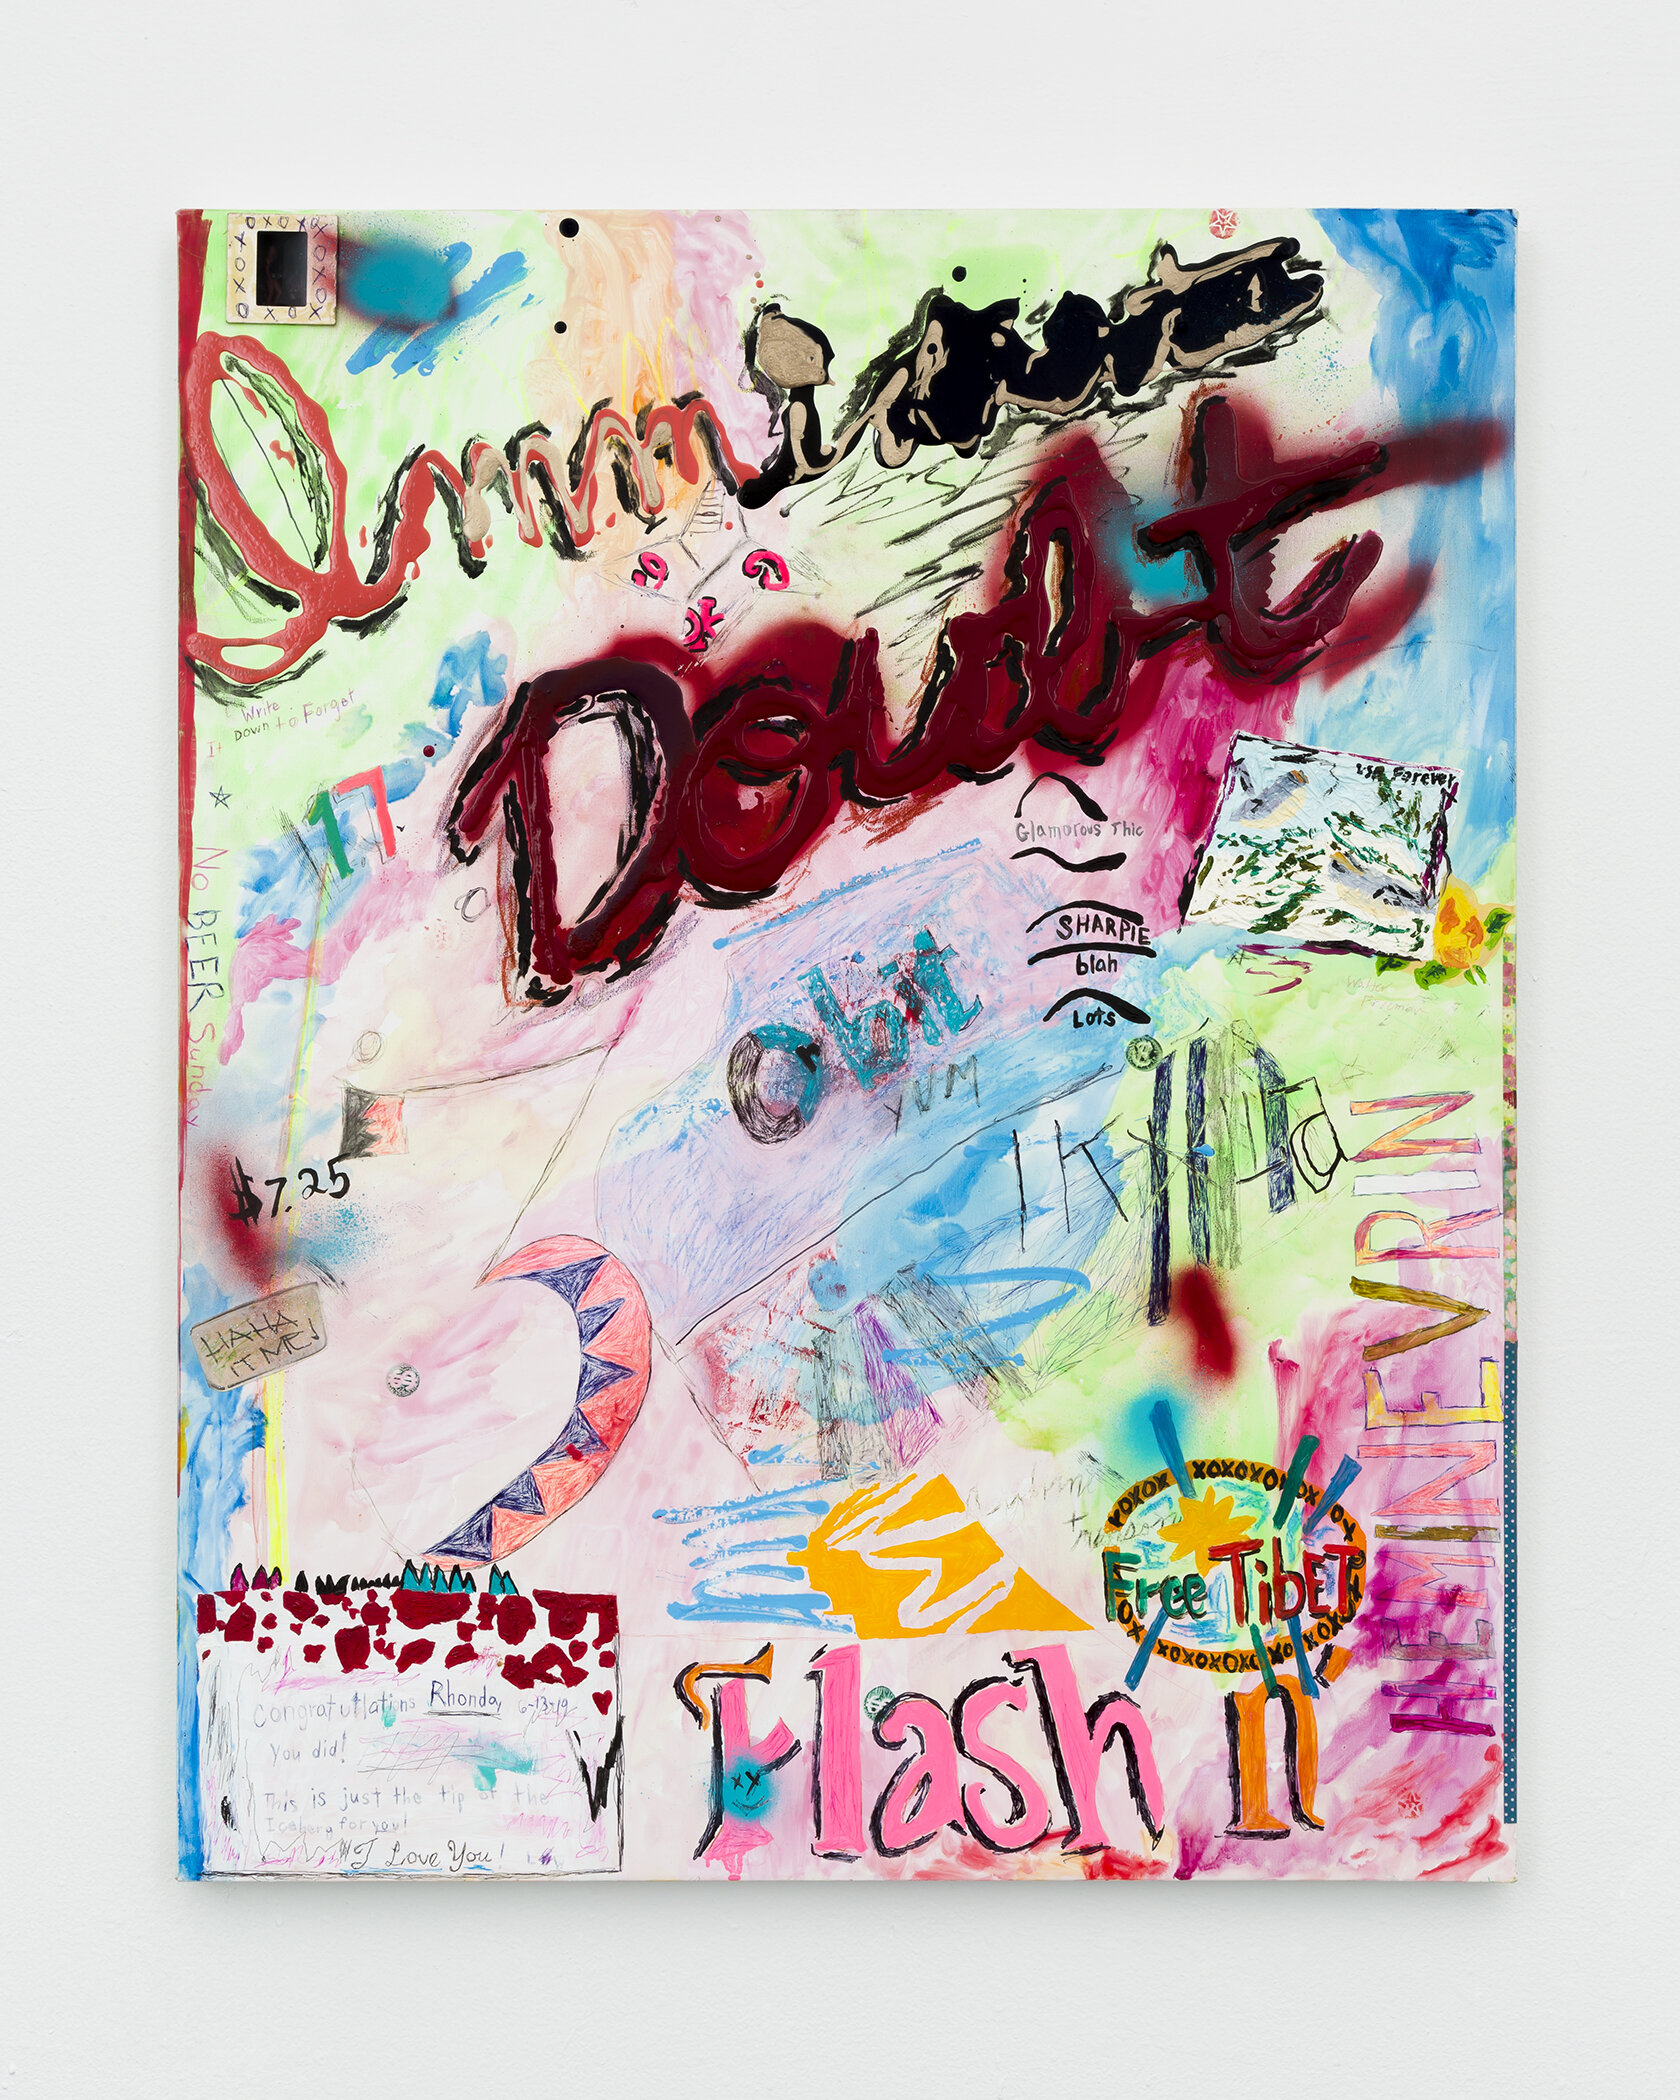  Alicia Gibson,  Immediate Doubt,  2019, Oil and various on canvas,  30 × 24 inches  